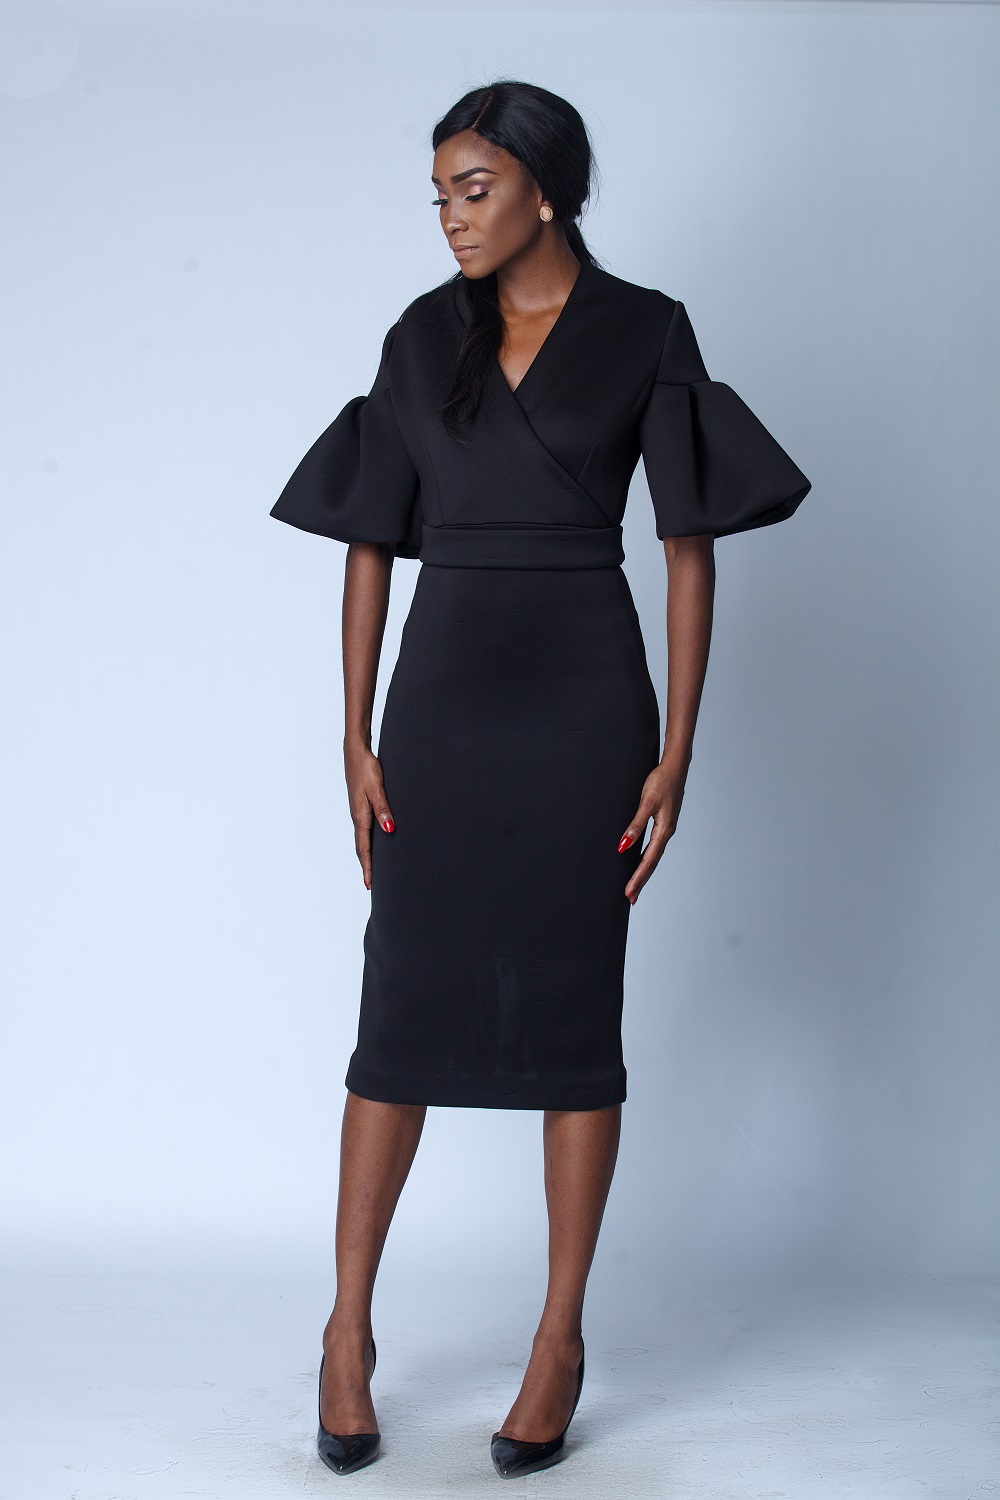 Lady Biba Just Released a Stylish New Collection for #LadyBosses